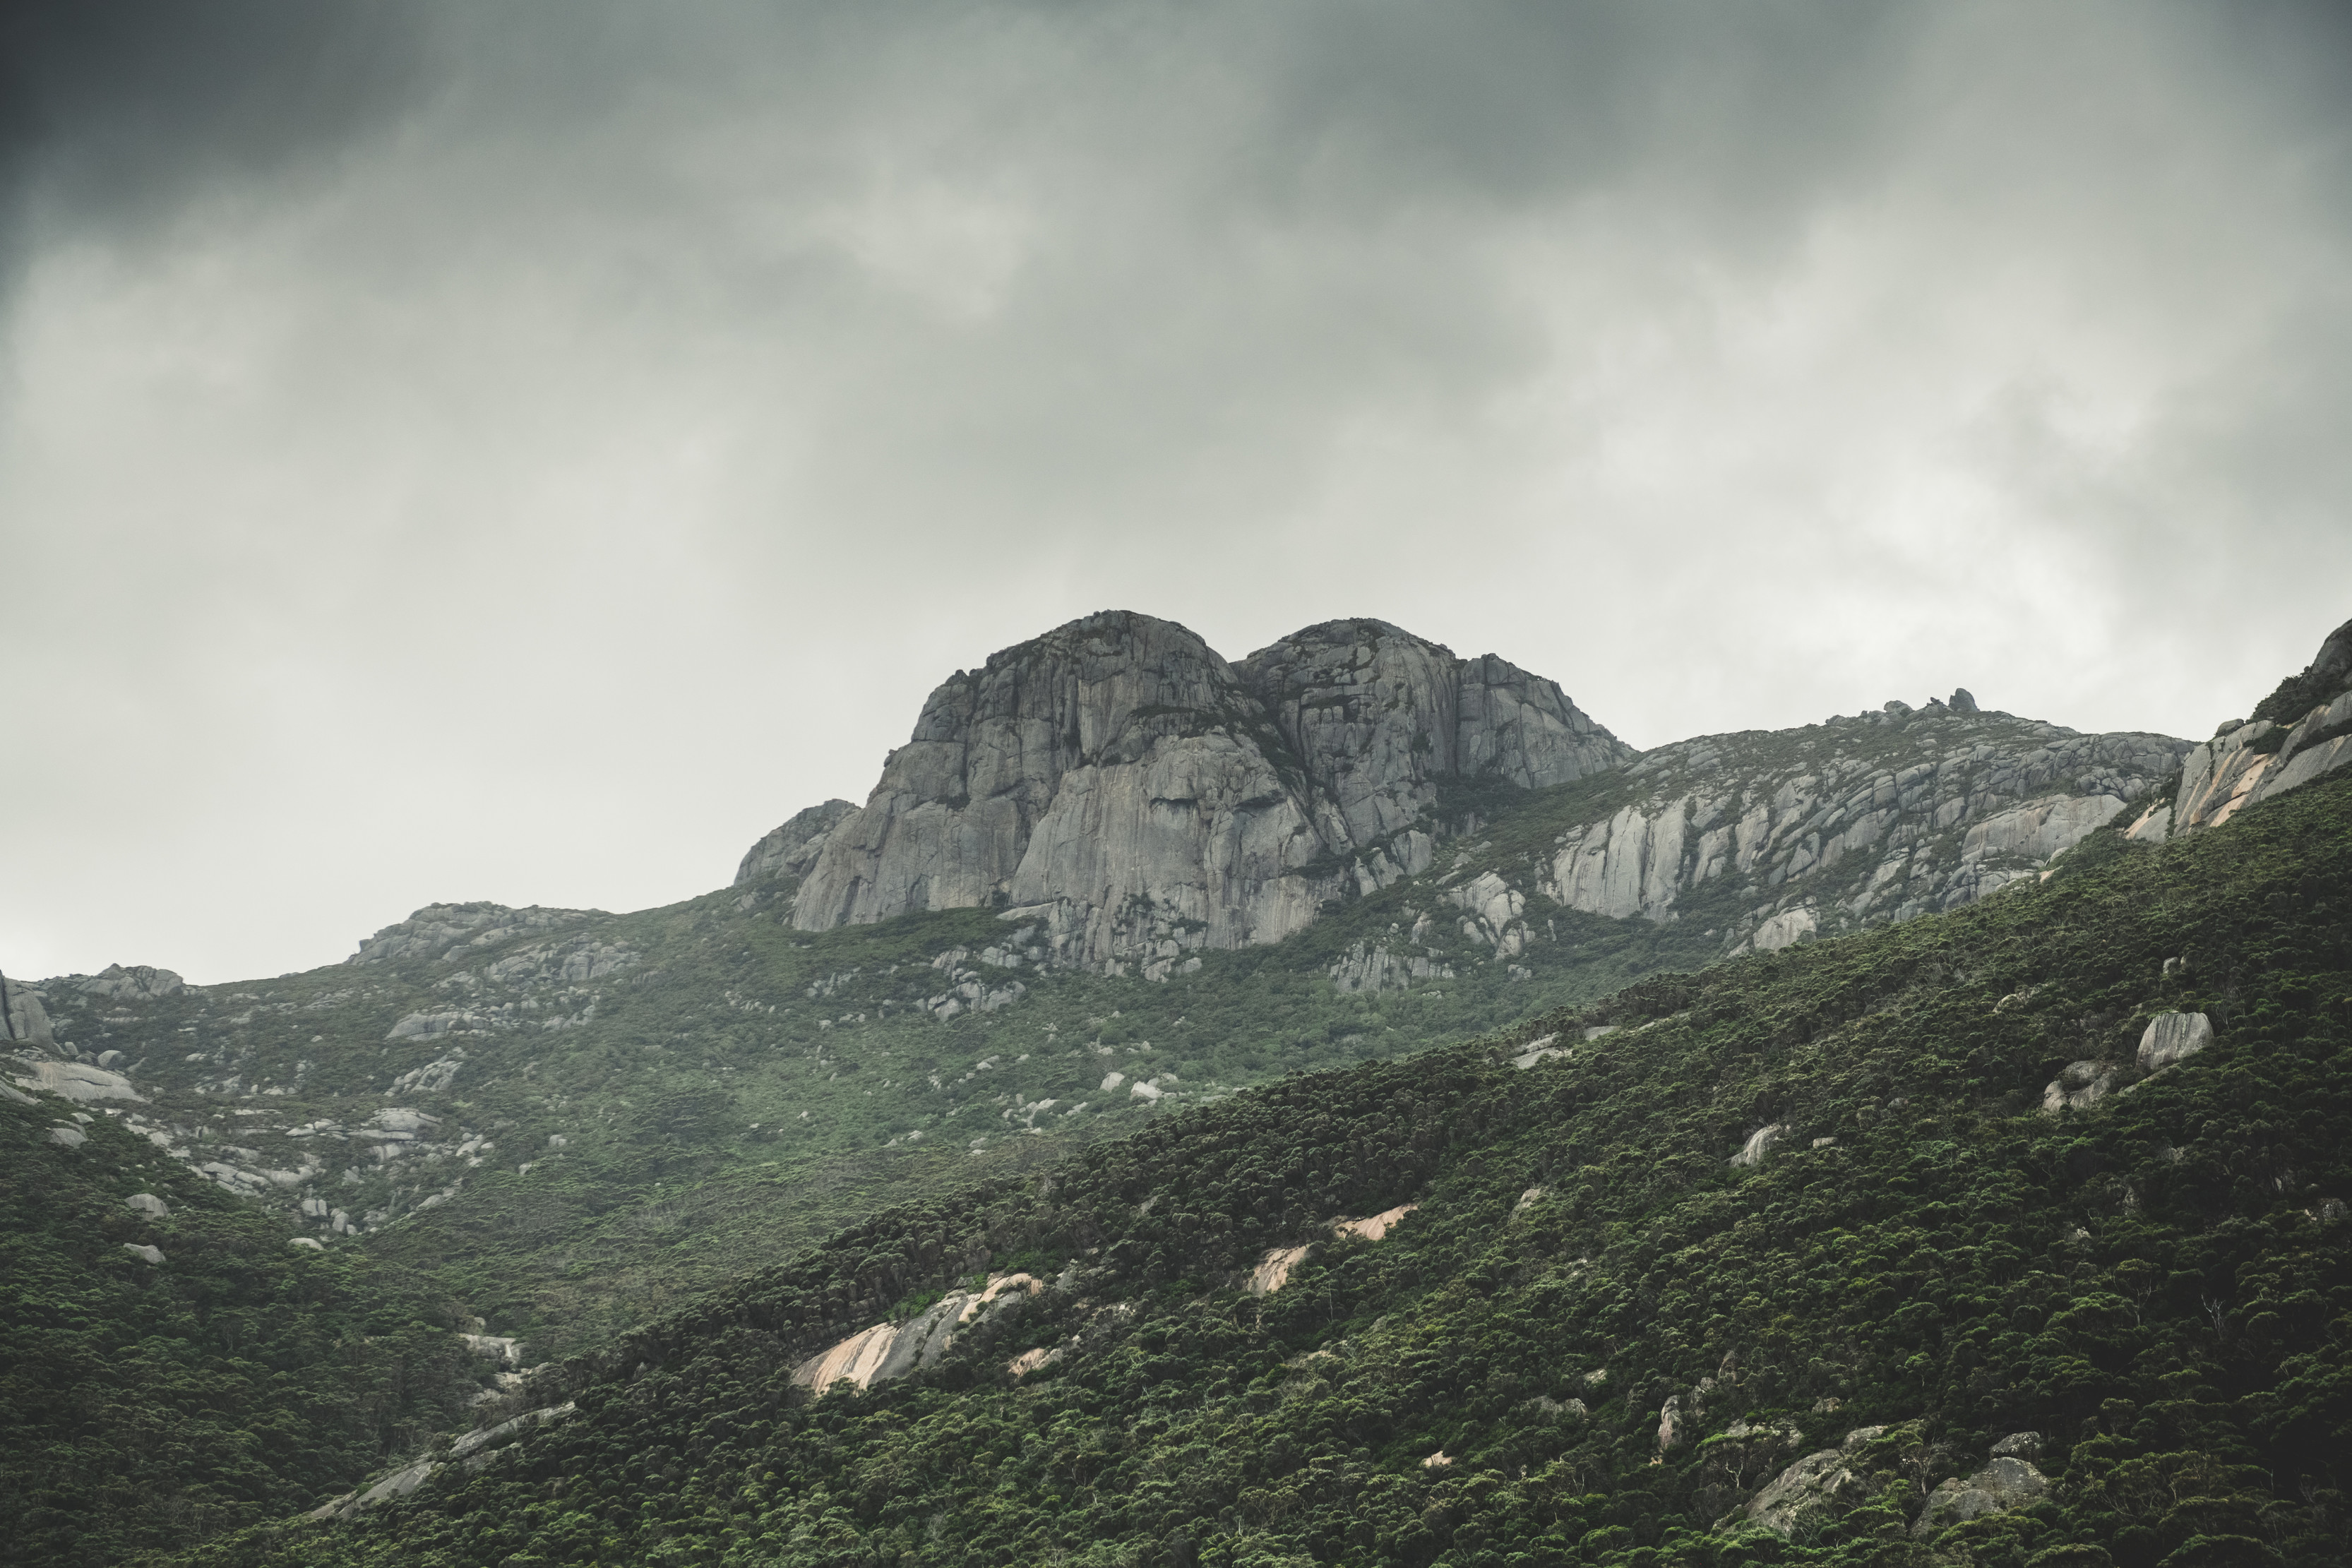 A dramatic and moody image of Strzelecki Peaks, Strzelecki National Park. Surrounded by bushland and clouds.